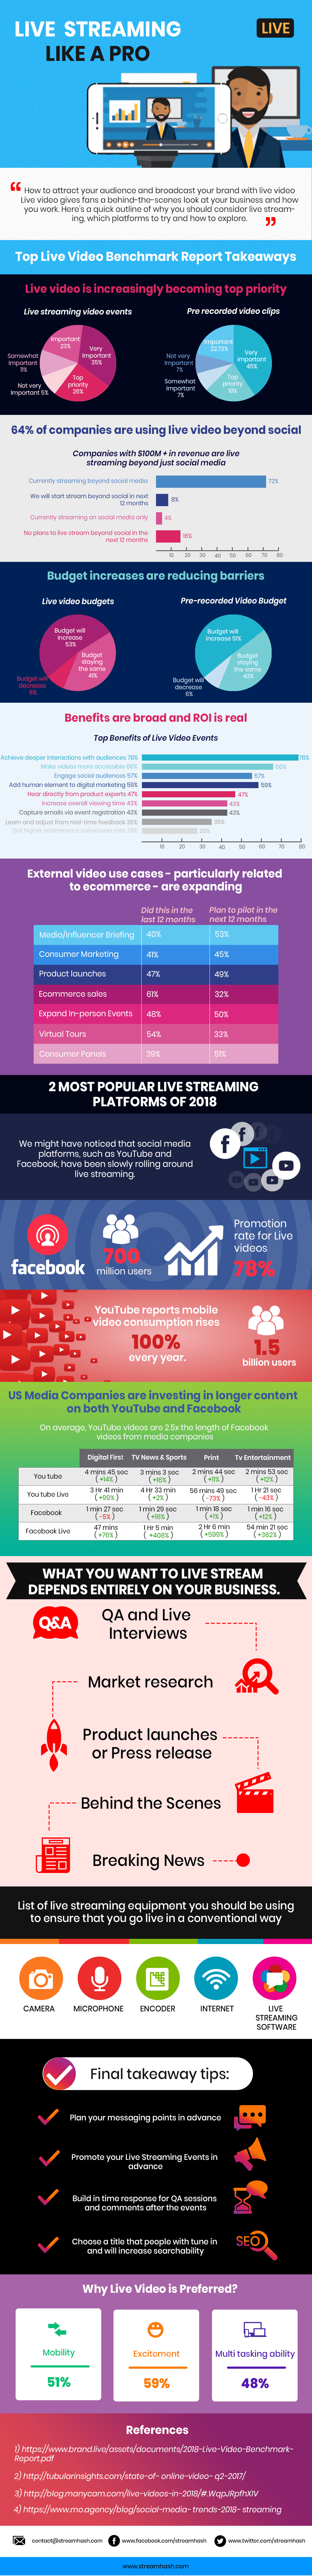 Social Media Trends: Live Streaming [Infographic] 16261788184918